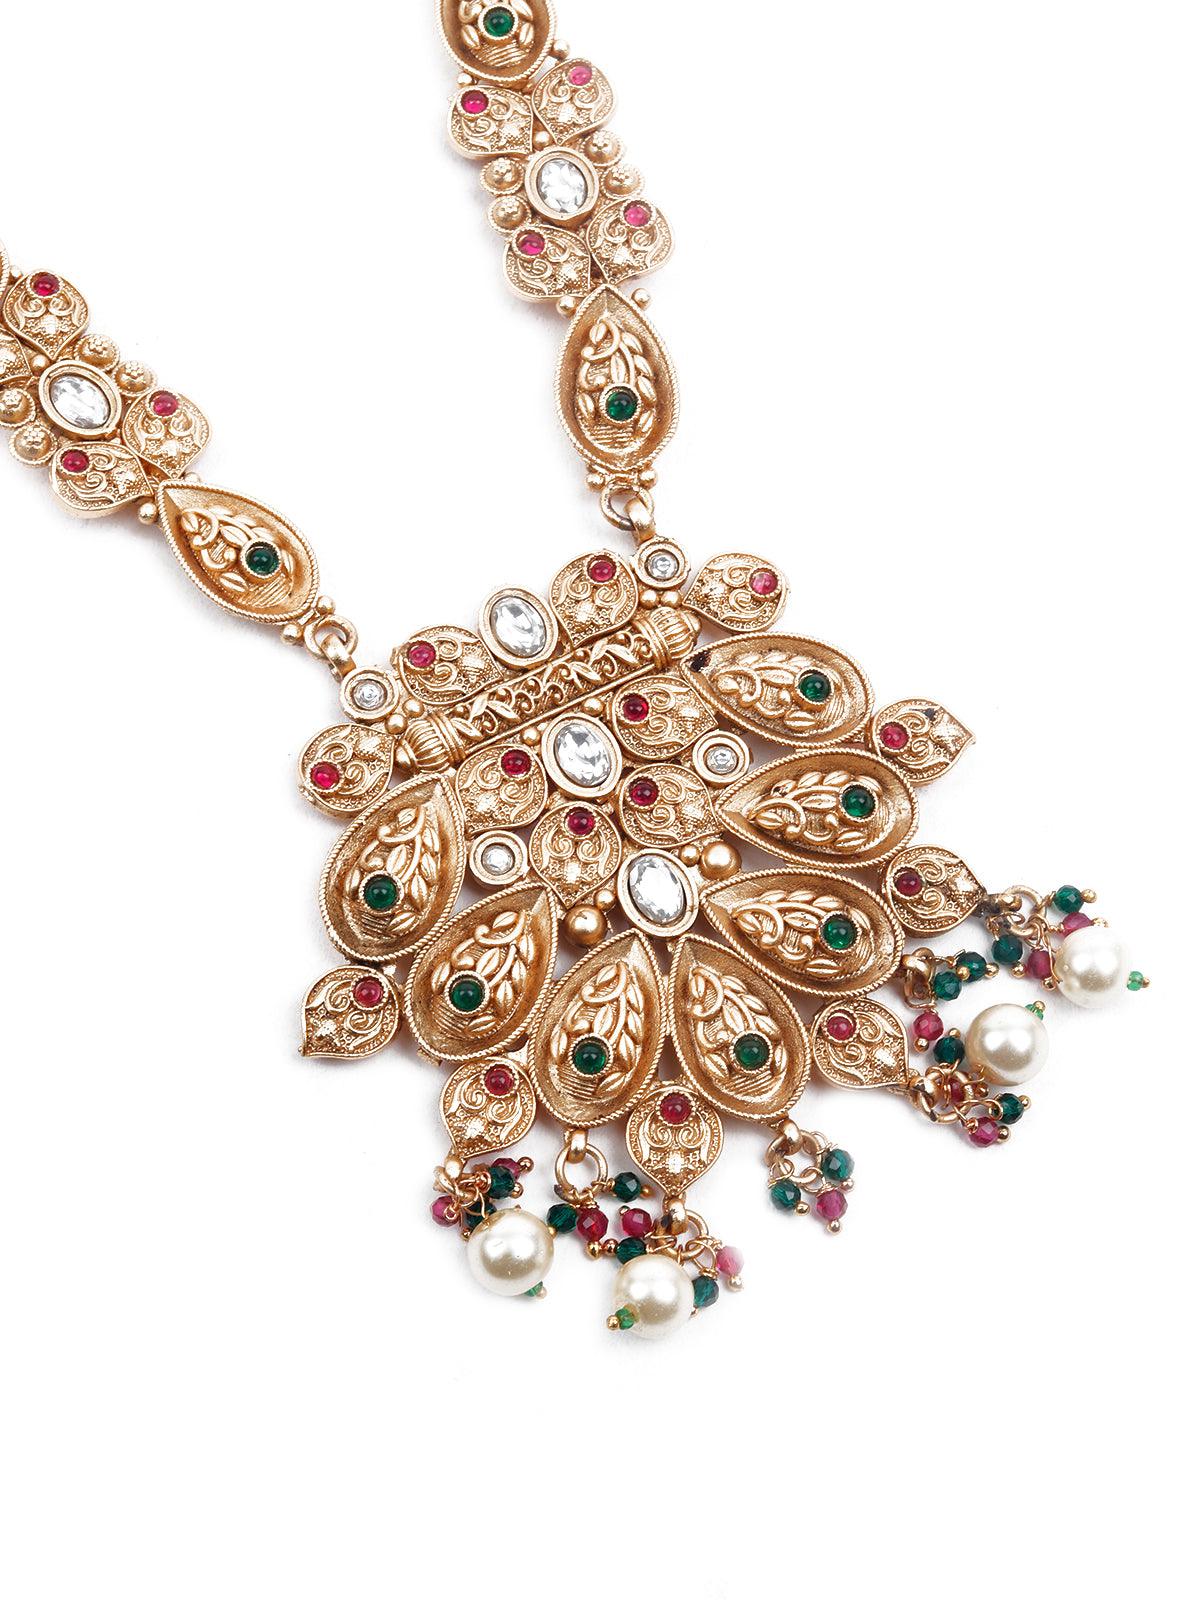 Women's Exquisitly Crafted Gold Necklace Set - Odette